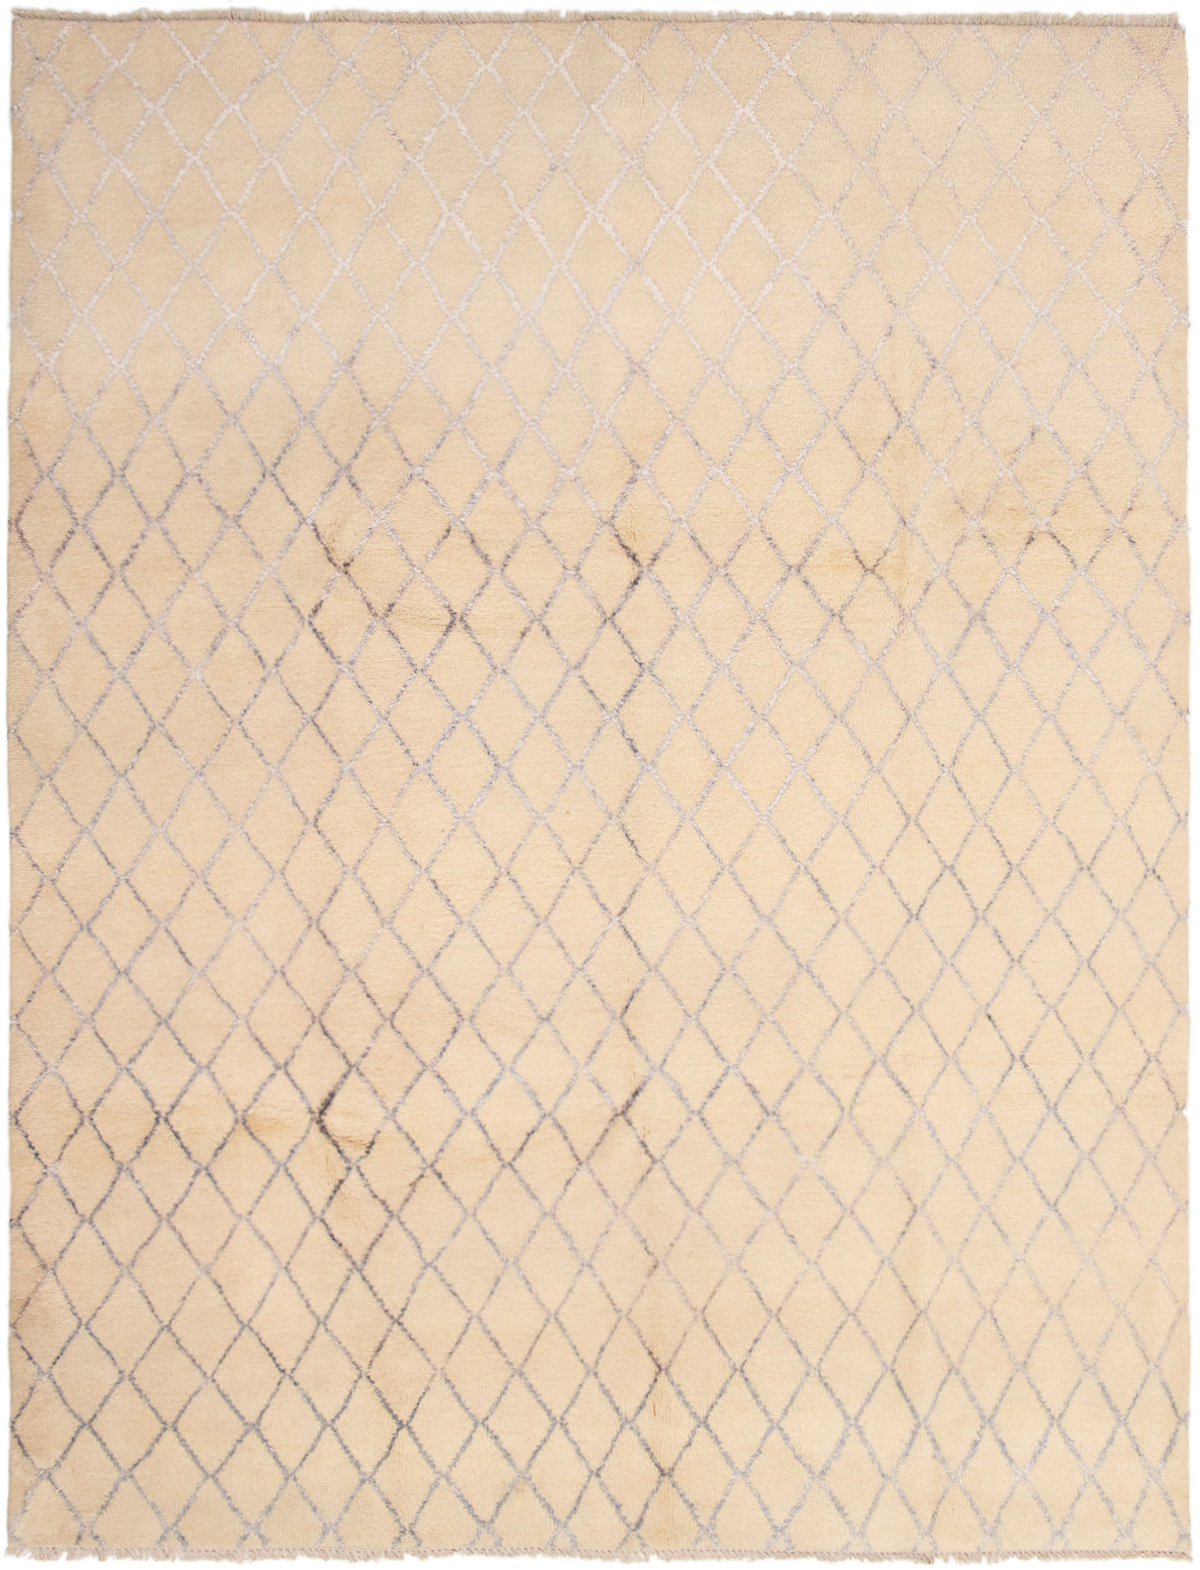 Hand-knotted Arlequin Cream  Rug 8'10" x 11'9" Size: 8'10" x 11'9"  